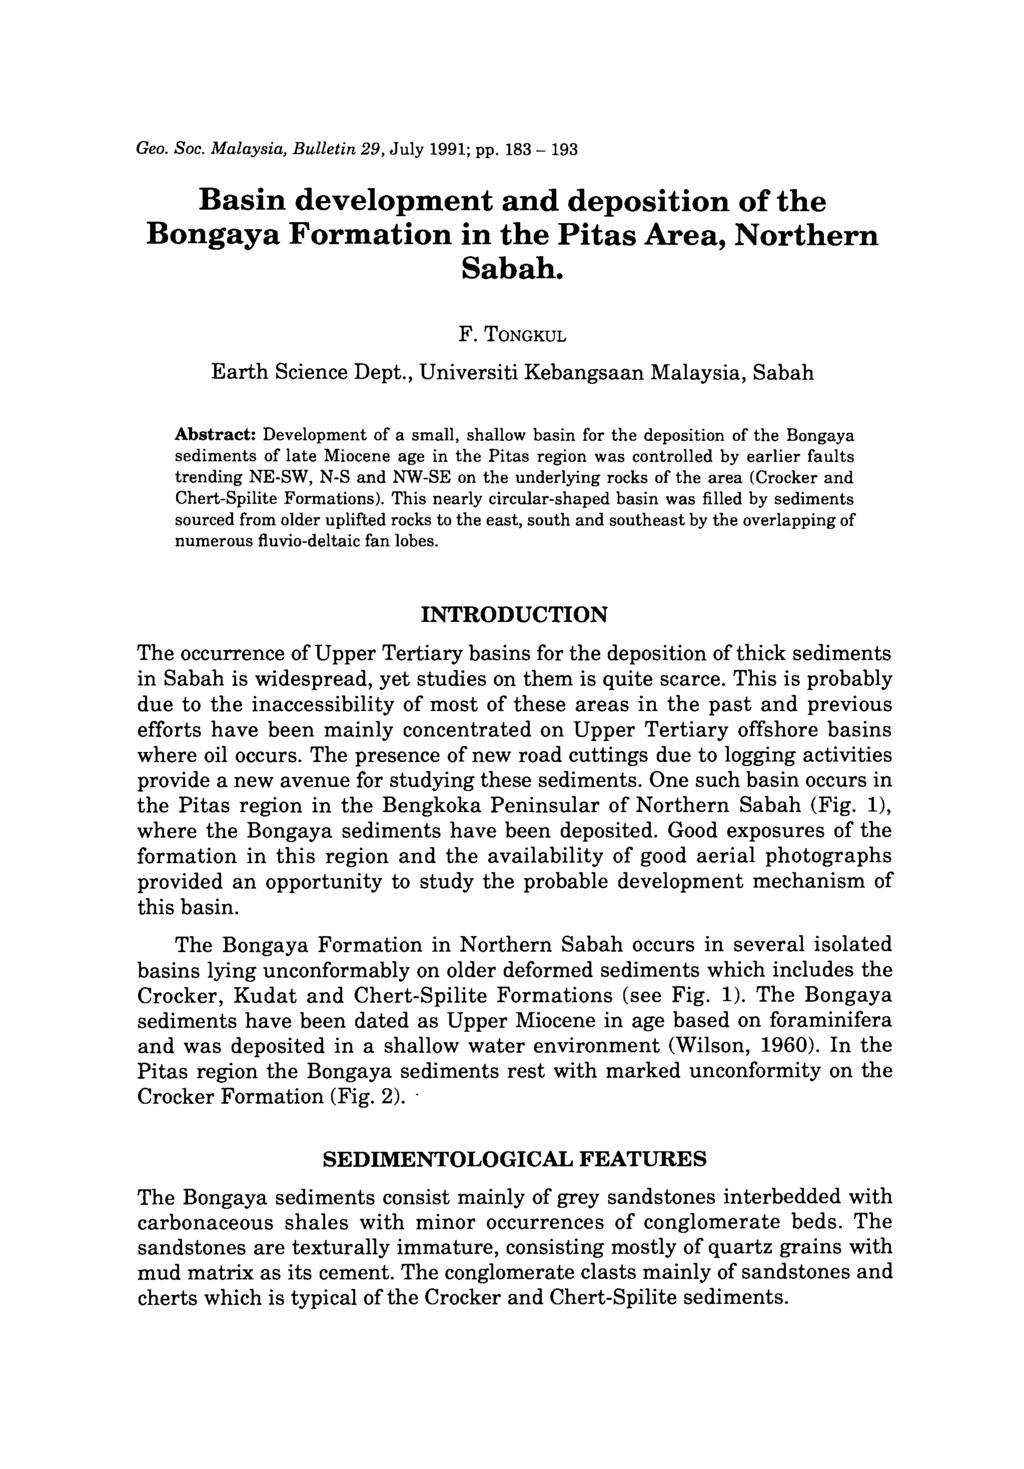 Ge. Sc. Malaysia, Bulletin 29, July 1991; pp. 183-193 Basin develpment and depsitin f the Bngaya Frmatin in the Pitas Area, Nrthern Sabah. F. TONGKUL Earth Science Dept.